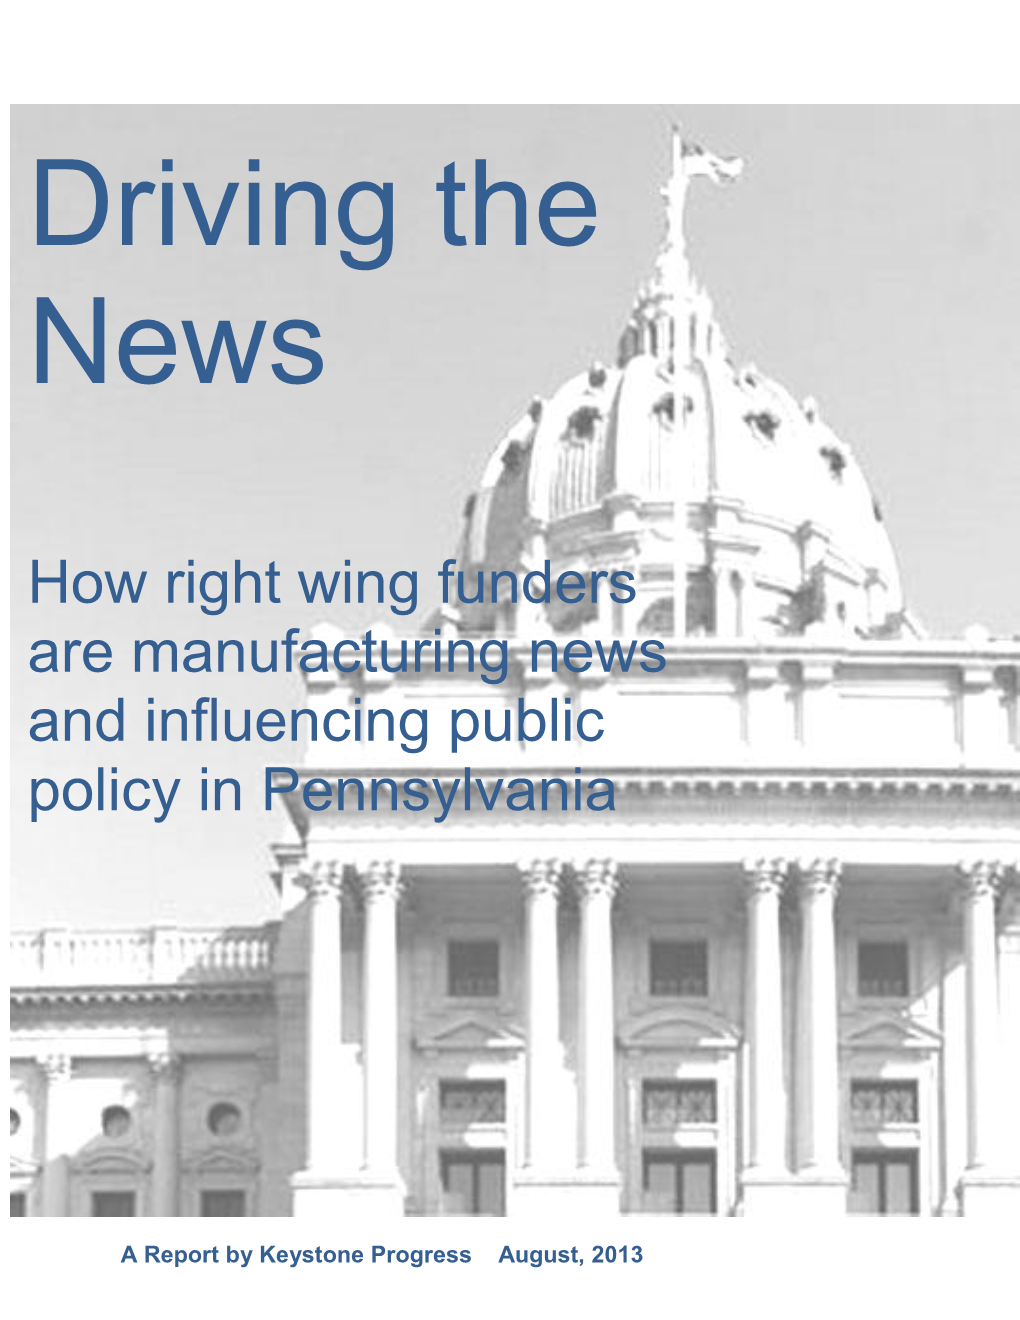 How Right Wing Funders Are Manufacturing News and Influencing Public Policy in Pennsylvania